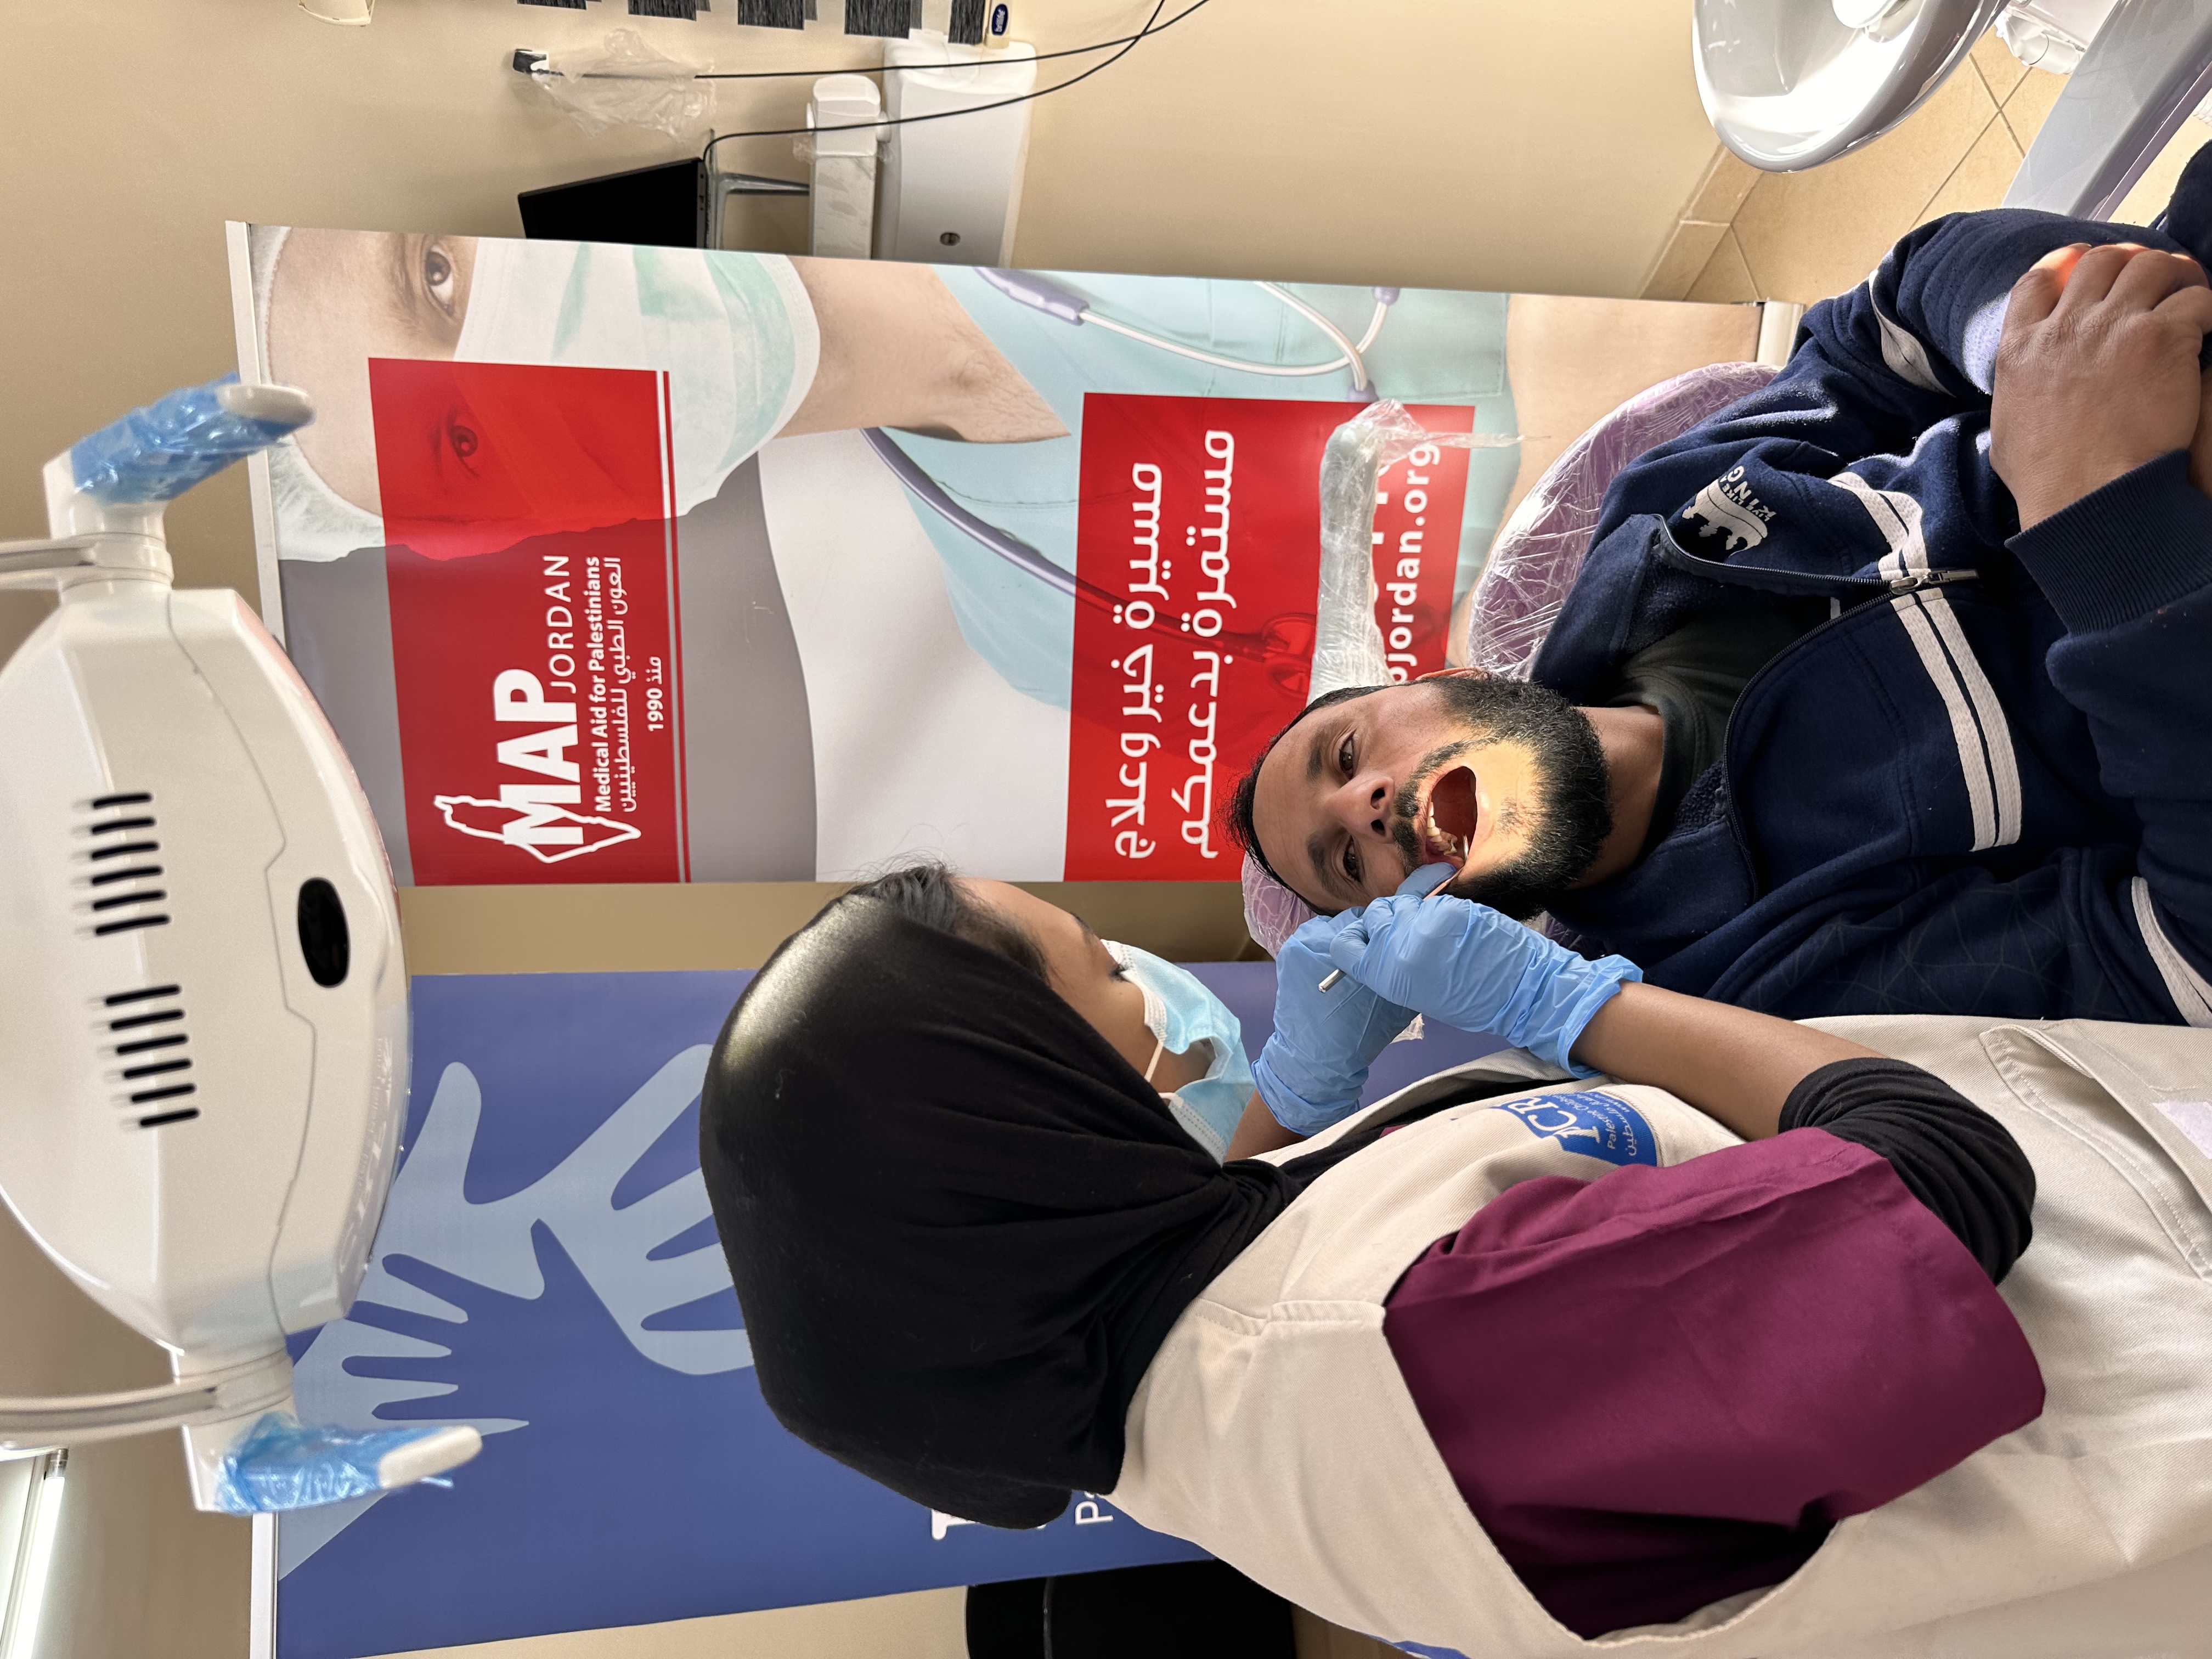 Treating 60 dental patients in Talbieh camp